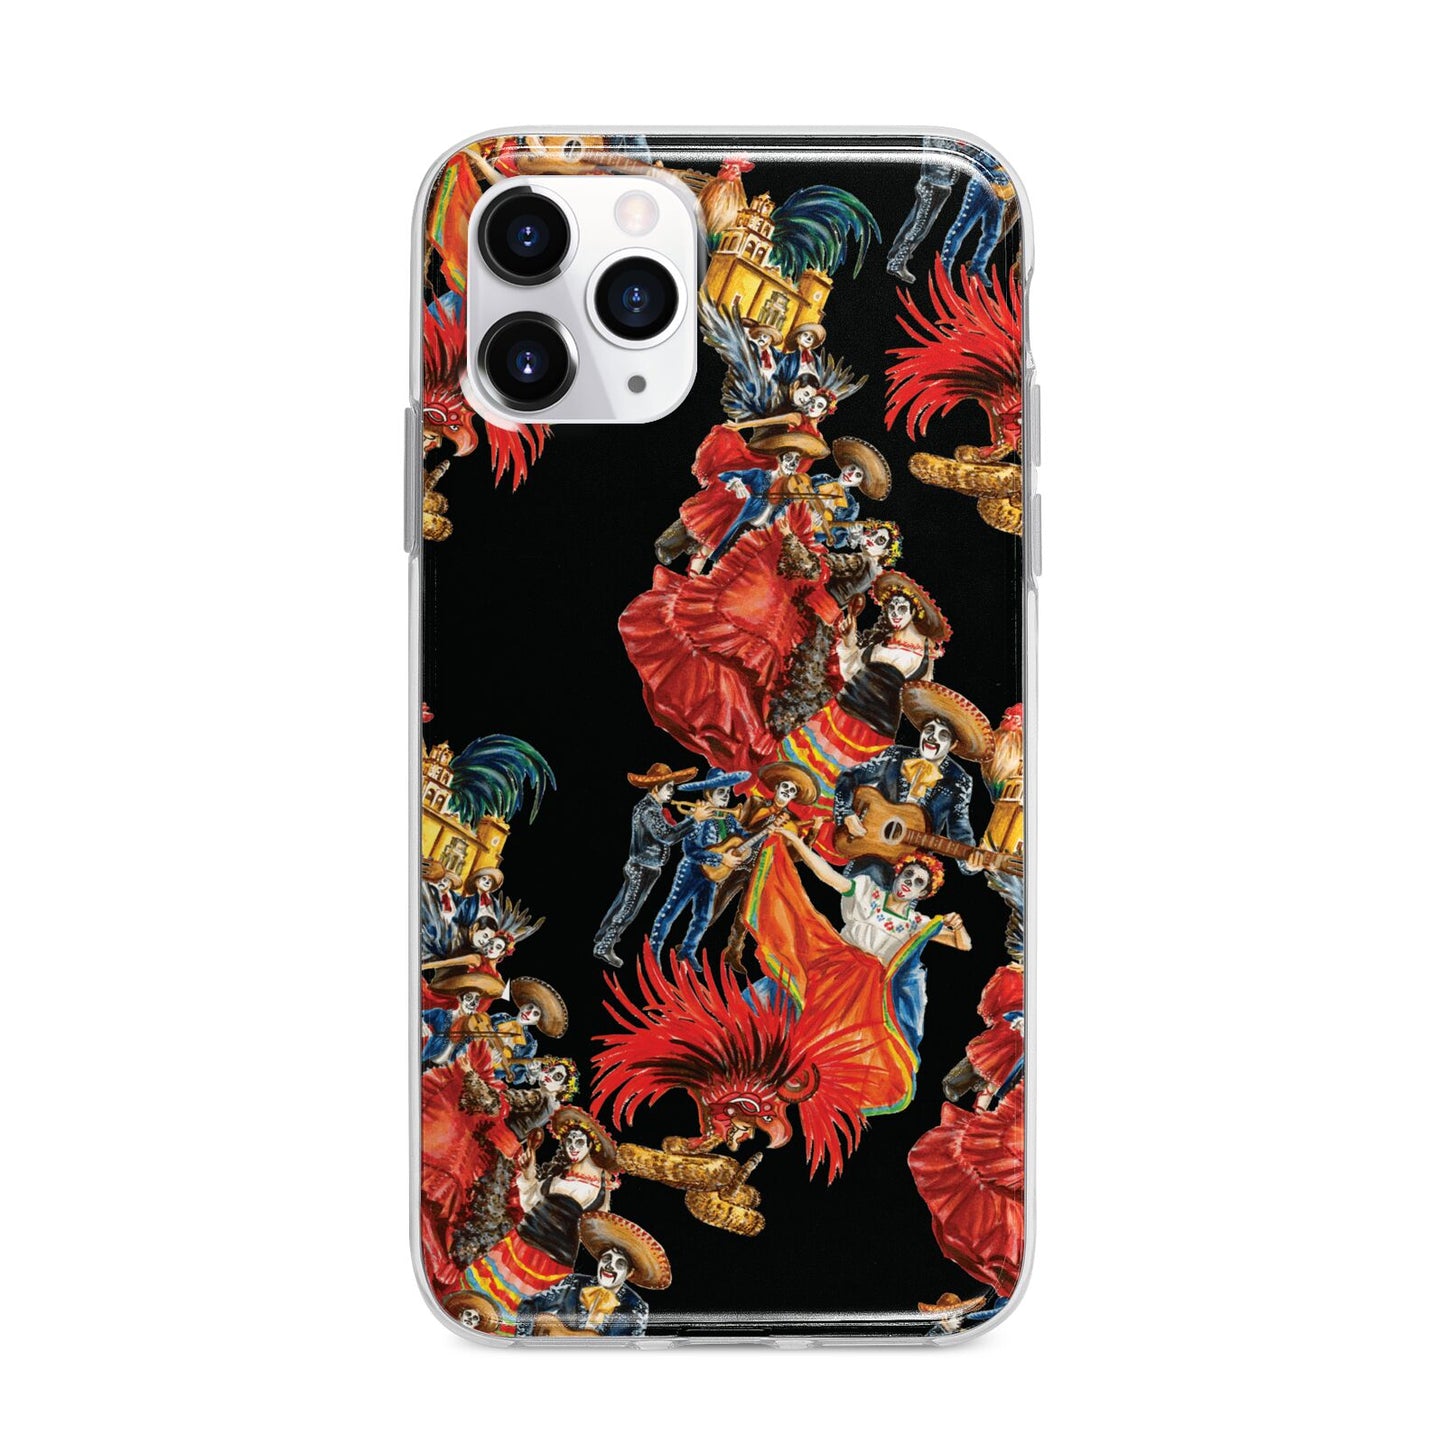 Day of the Dead Festival Apple iPhone 11 Pro Max in Silver with Bumper Case